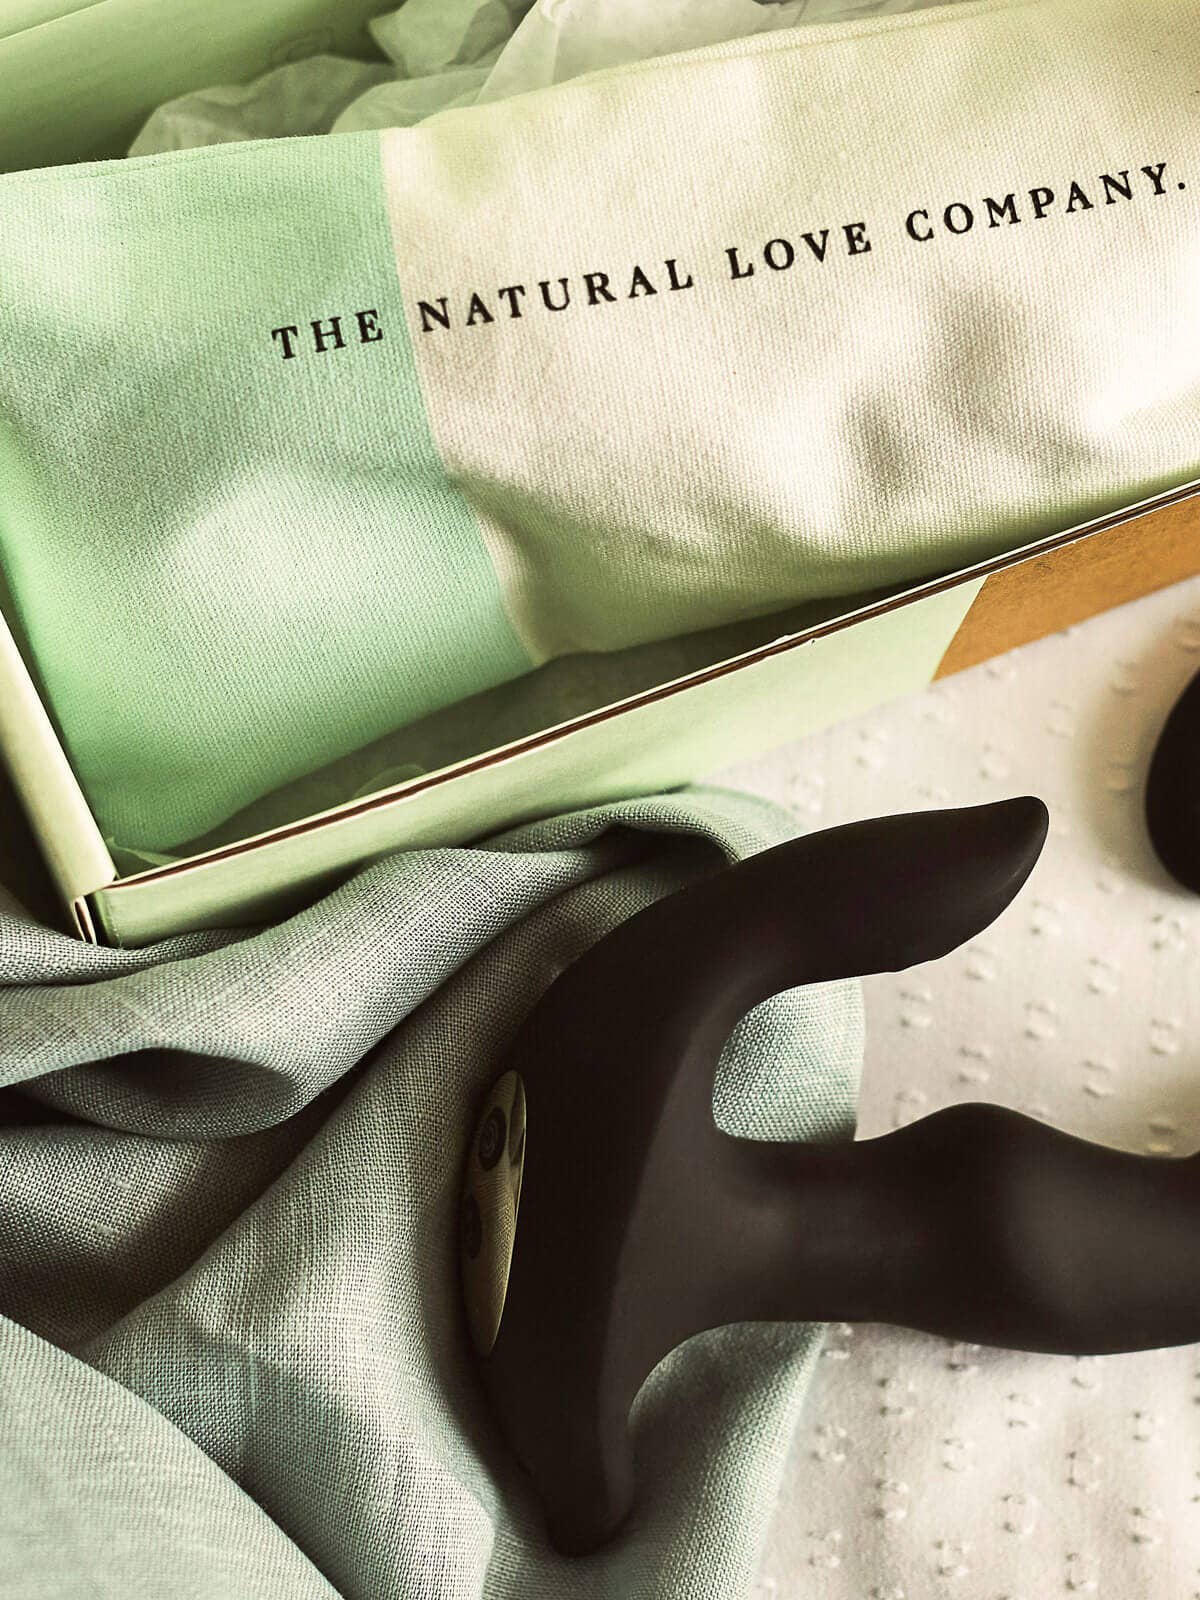 The Natural Love Company wholesale products